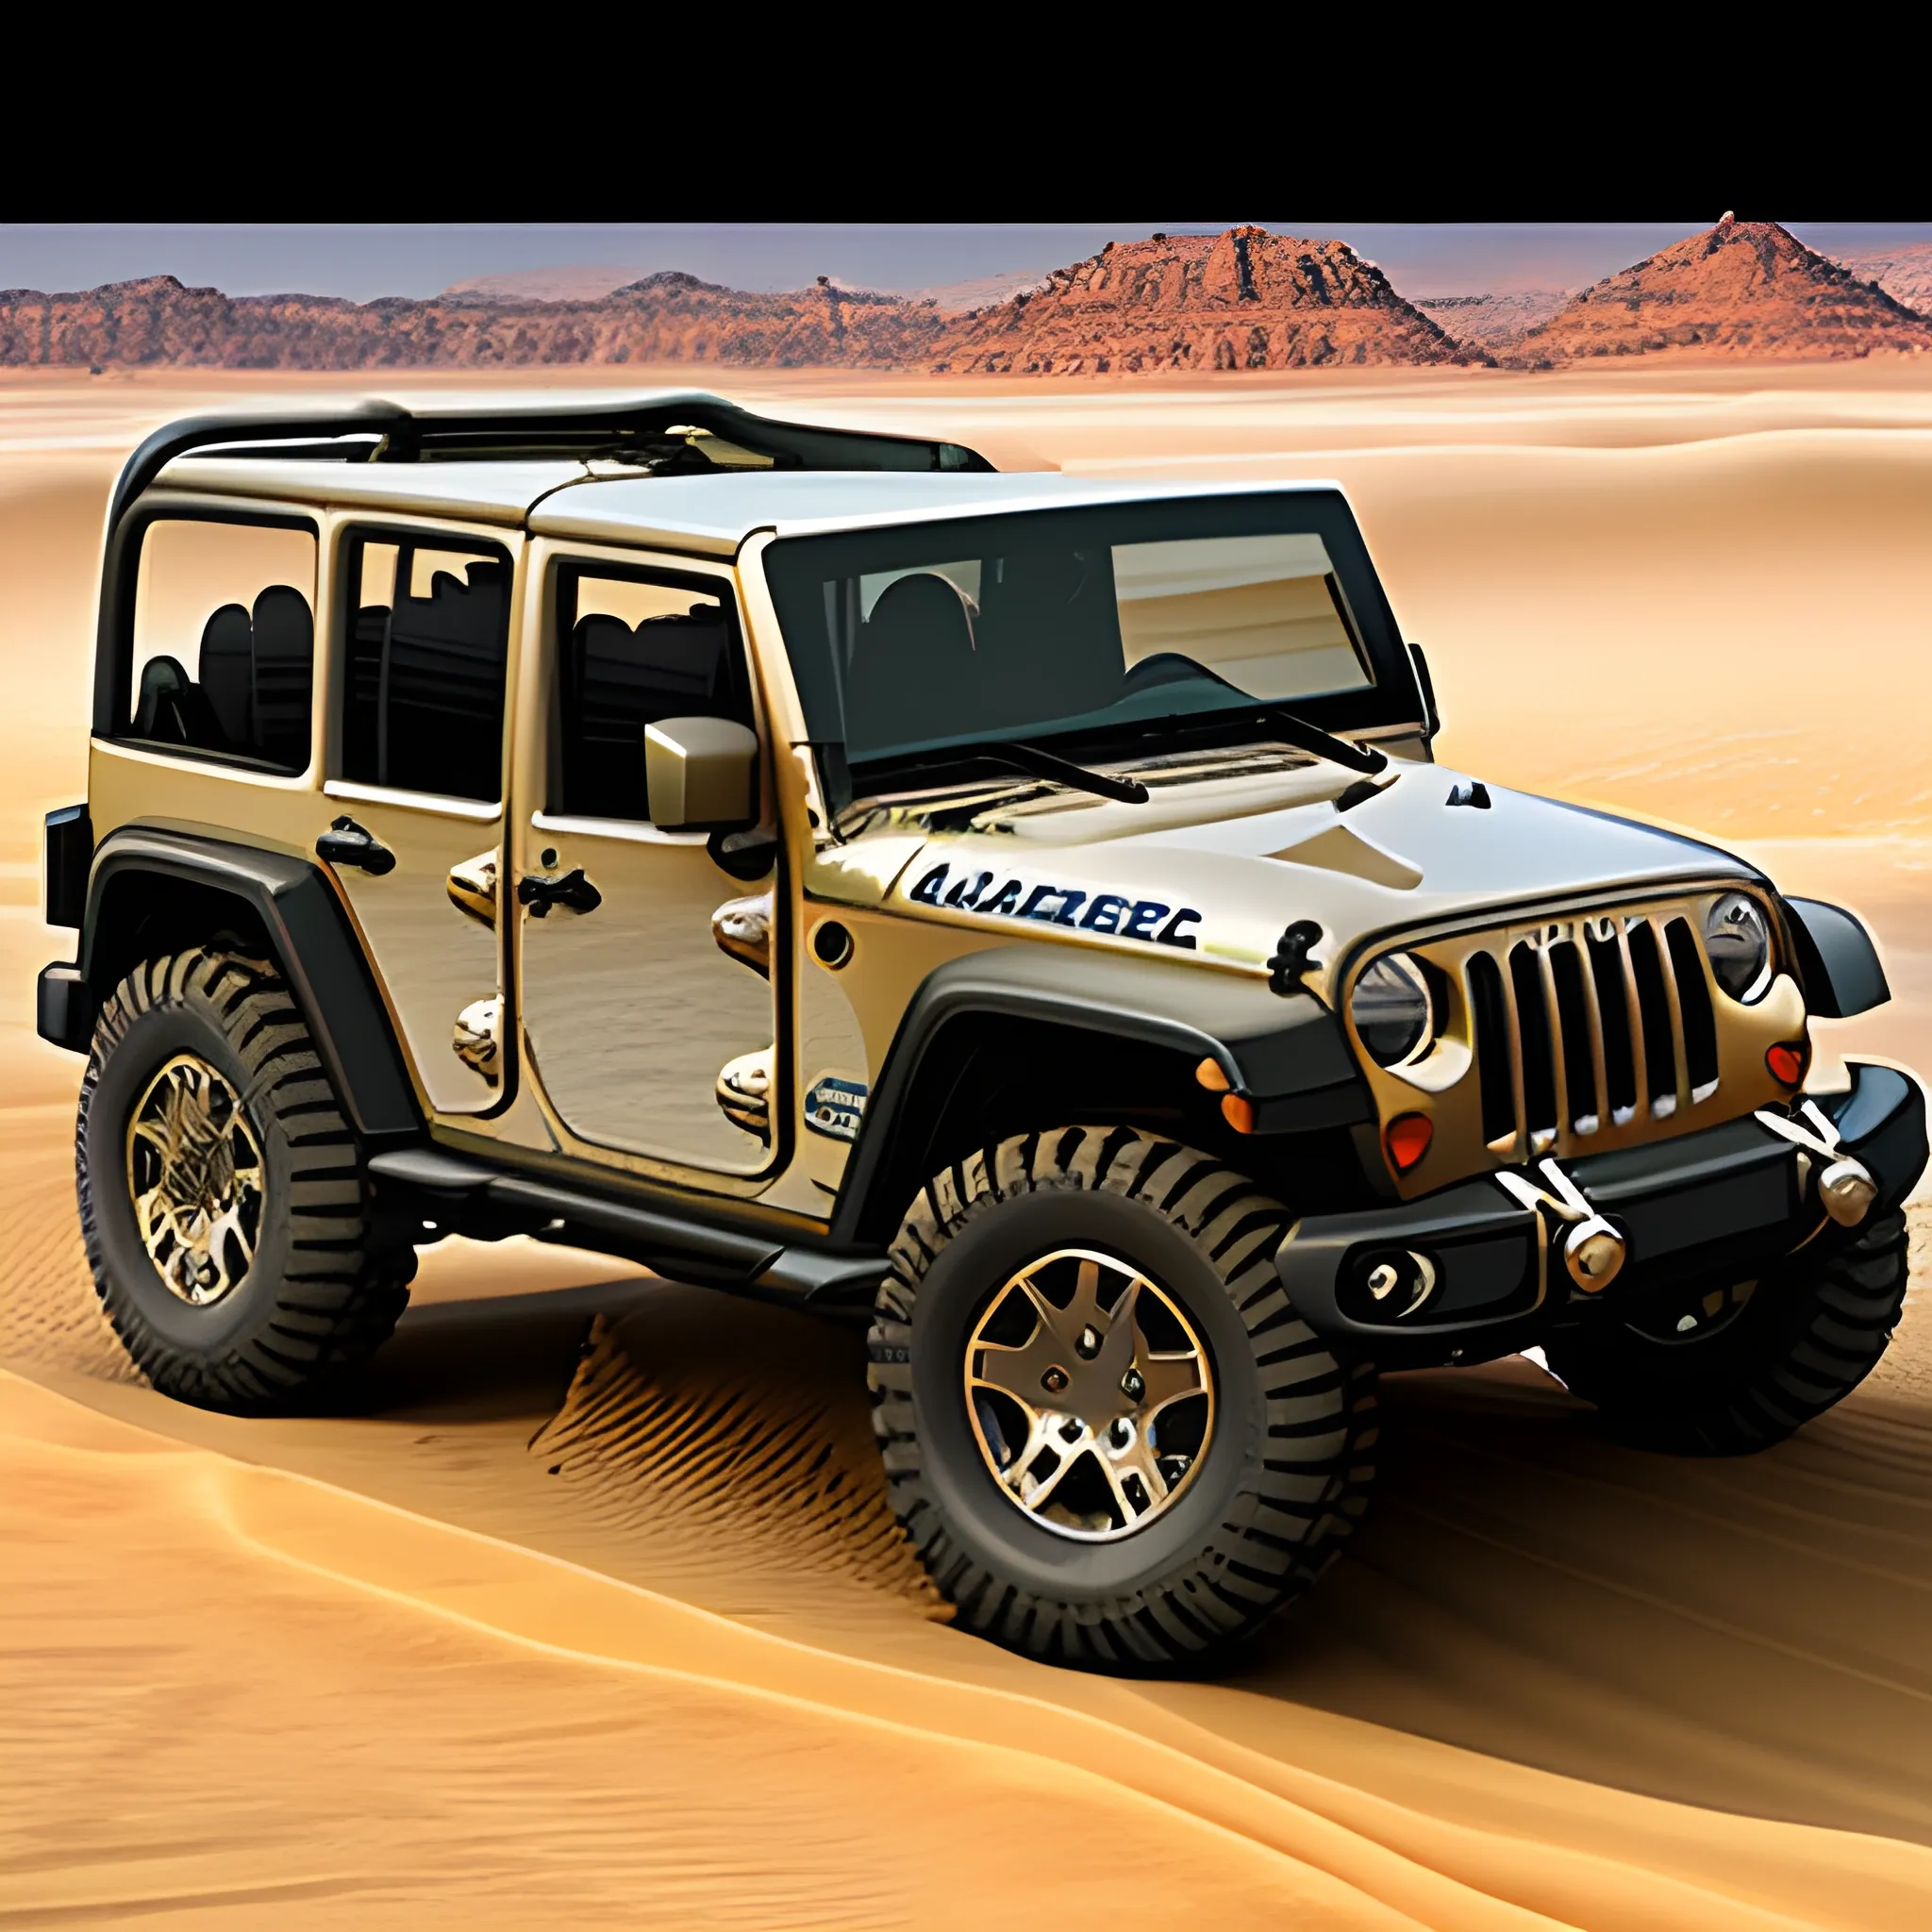 jeep offroad in desert size 1920 1080
